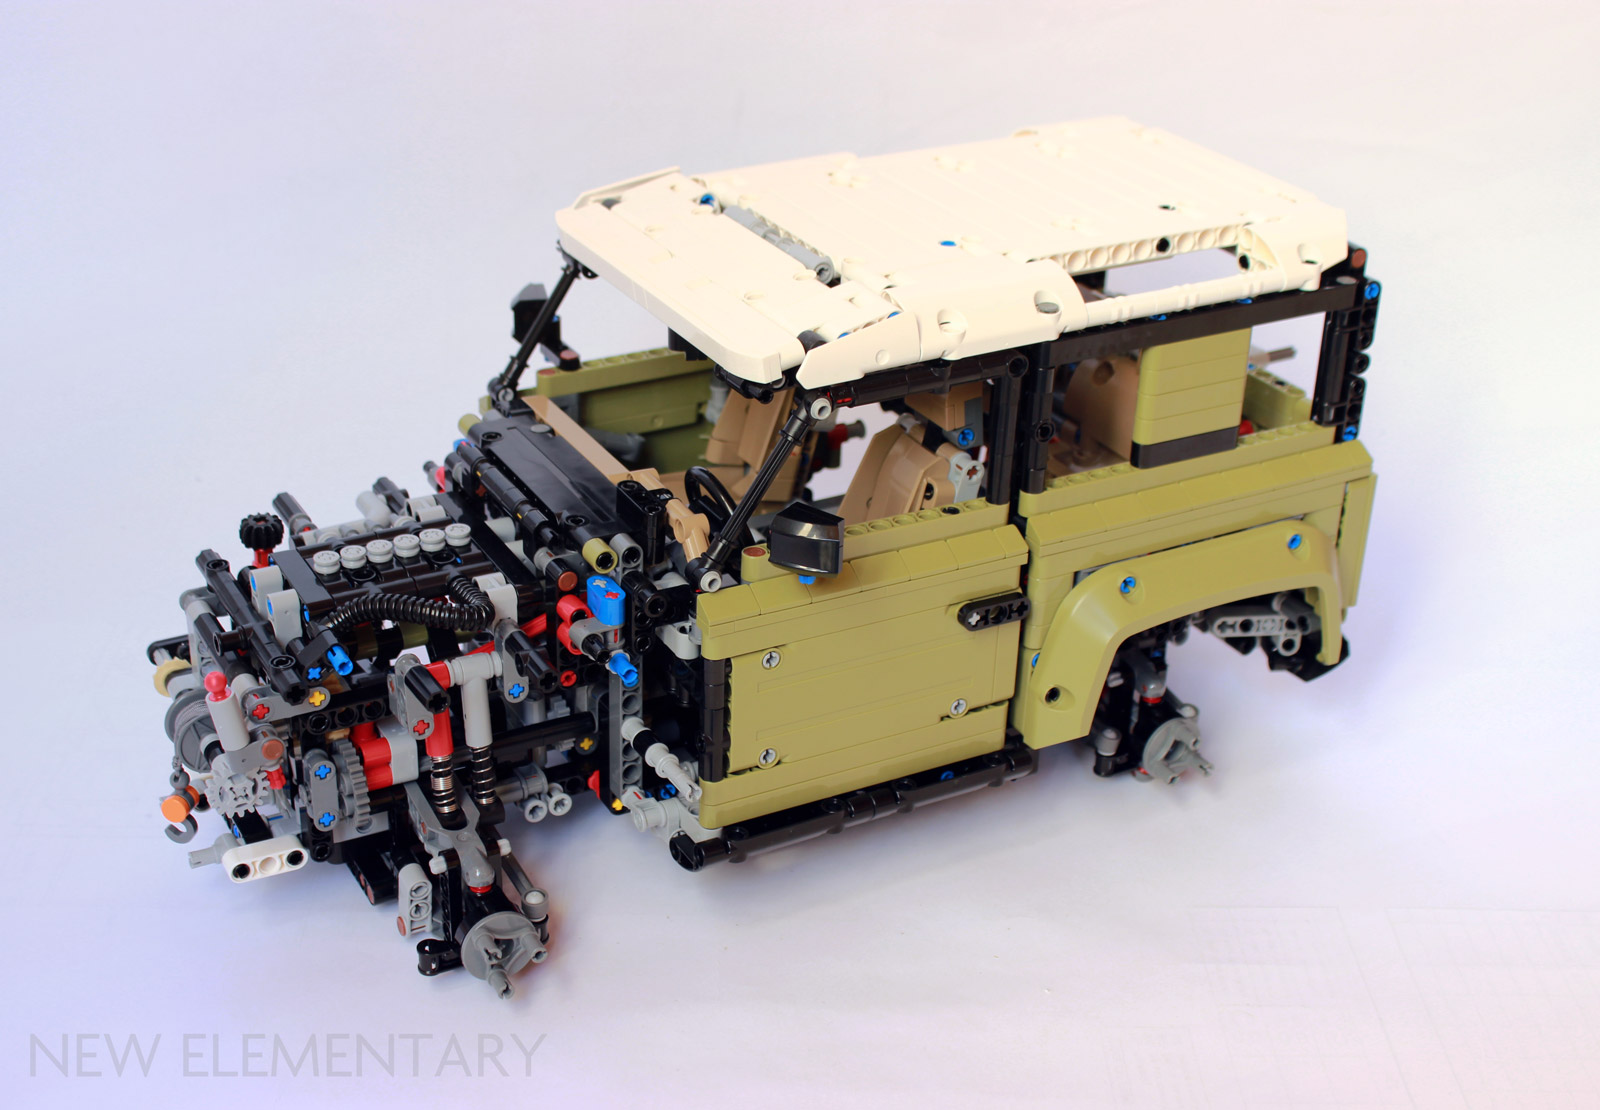 LEGO® Technic review: 42110 Land Rover Defender - the elements